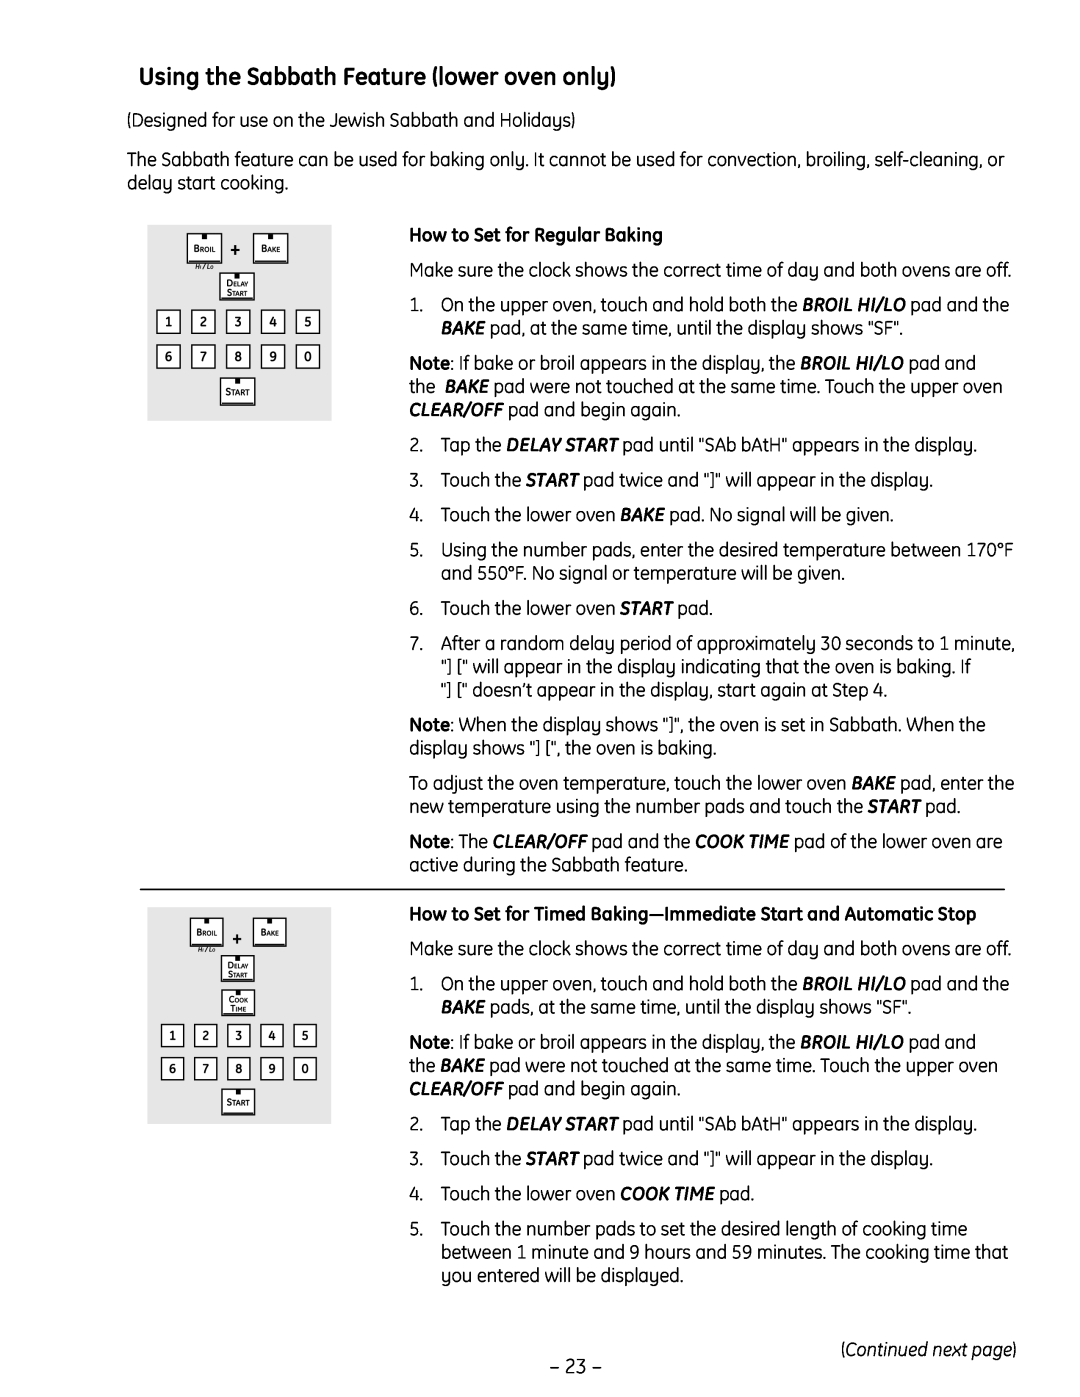 GE PT925 manual Using the Sabbath Feature lower oven only, How to Set for Regular Baking 